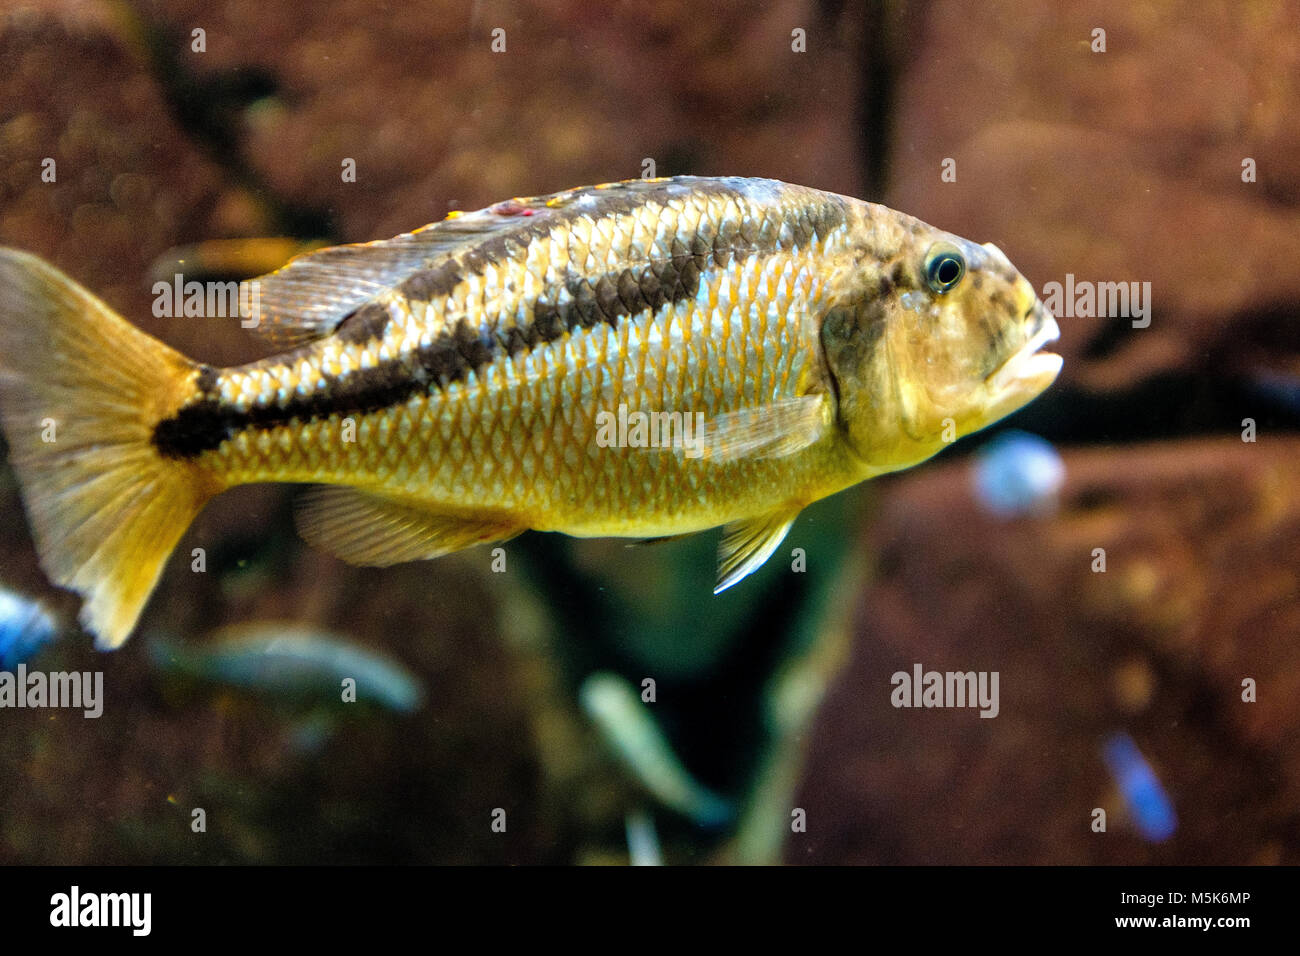 Single Black Spotted Malawi Cichlid - fish from the African Malawi lake in a zoological aquarium Stock Photo